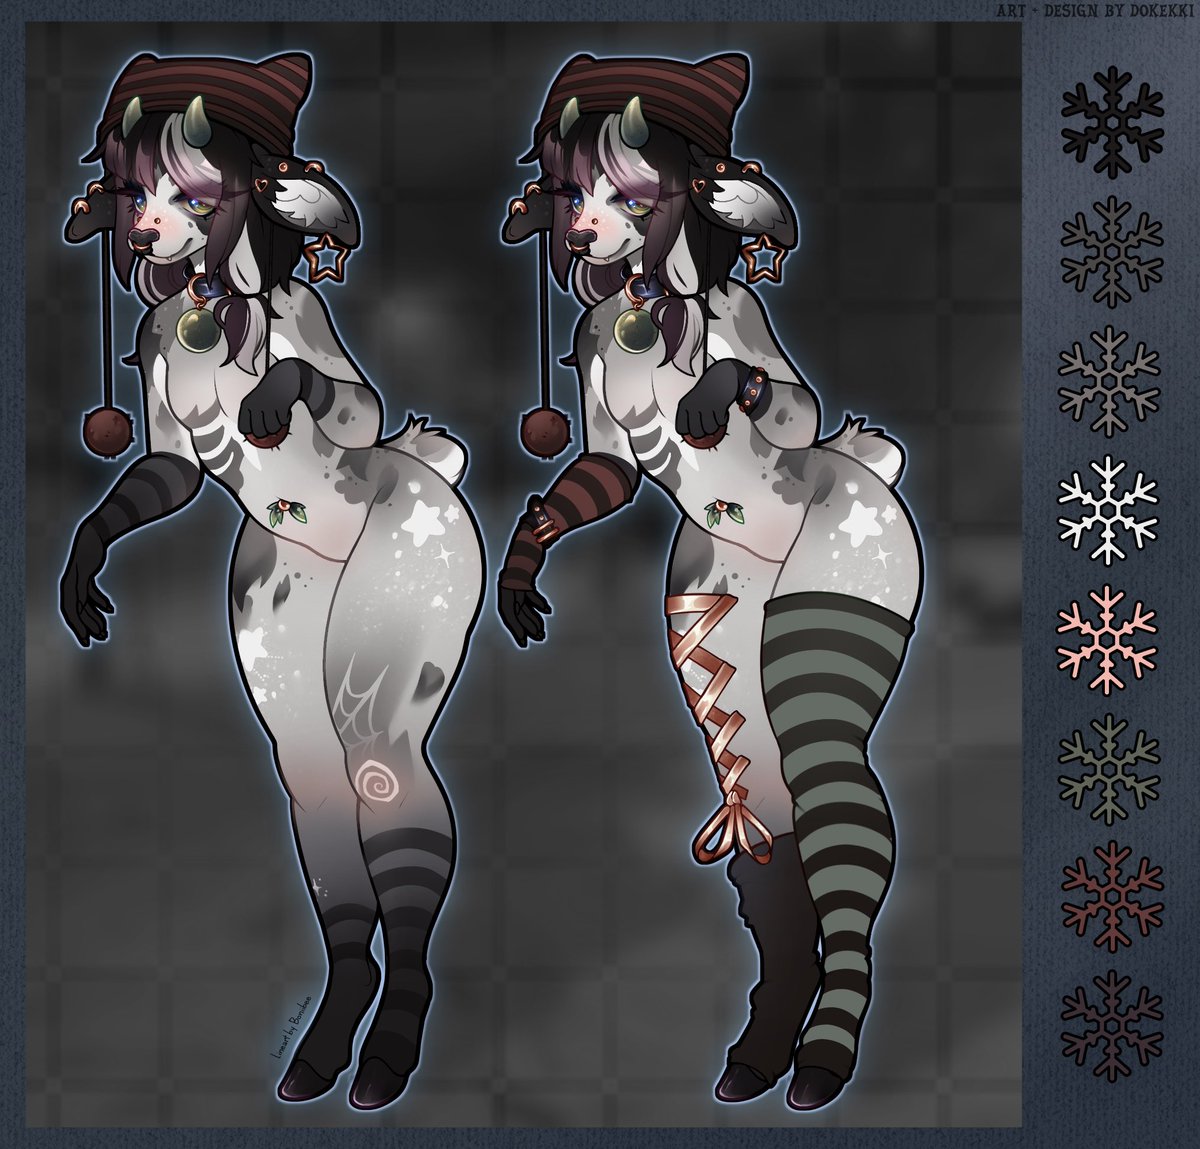 Creepmas deer finished up for a client~ 🖤🖤 Base by @Boniibee